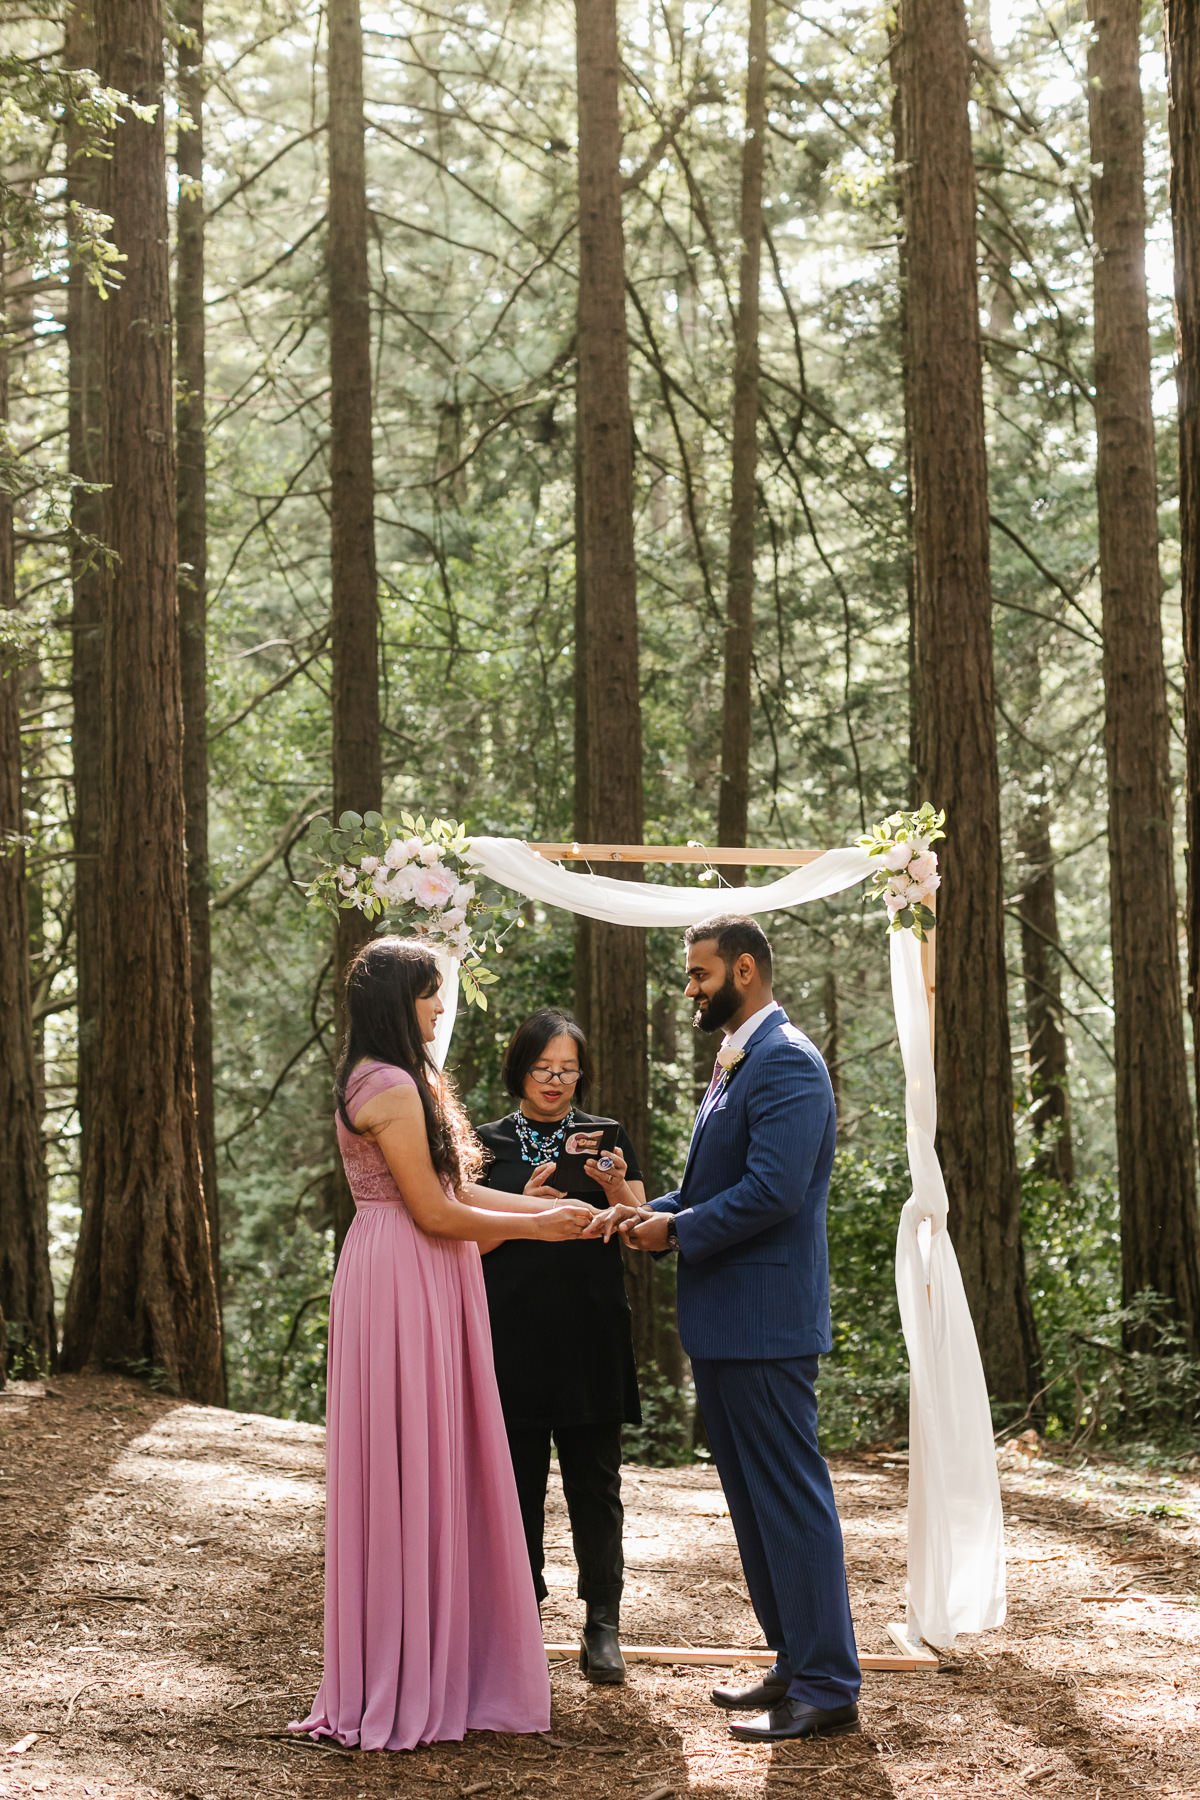 Bride and groom exchange rings at their wedding ceremony in Joaquin Miller Park